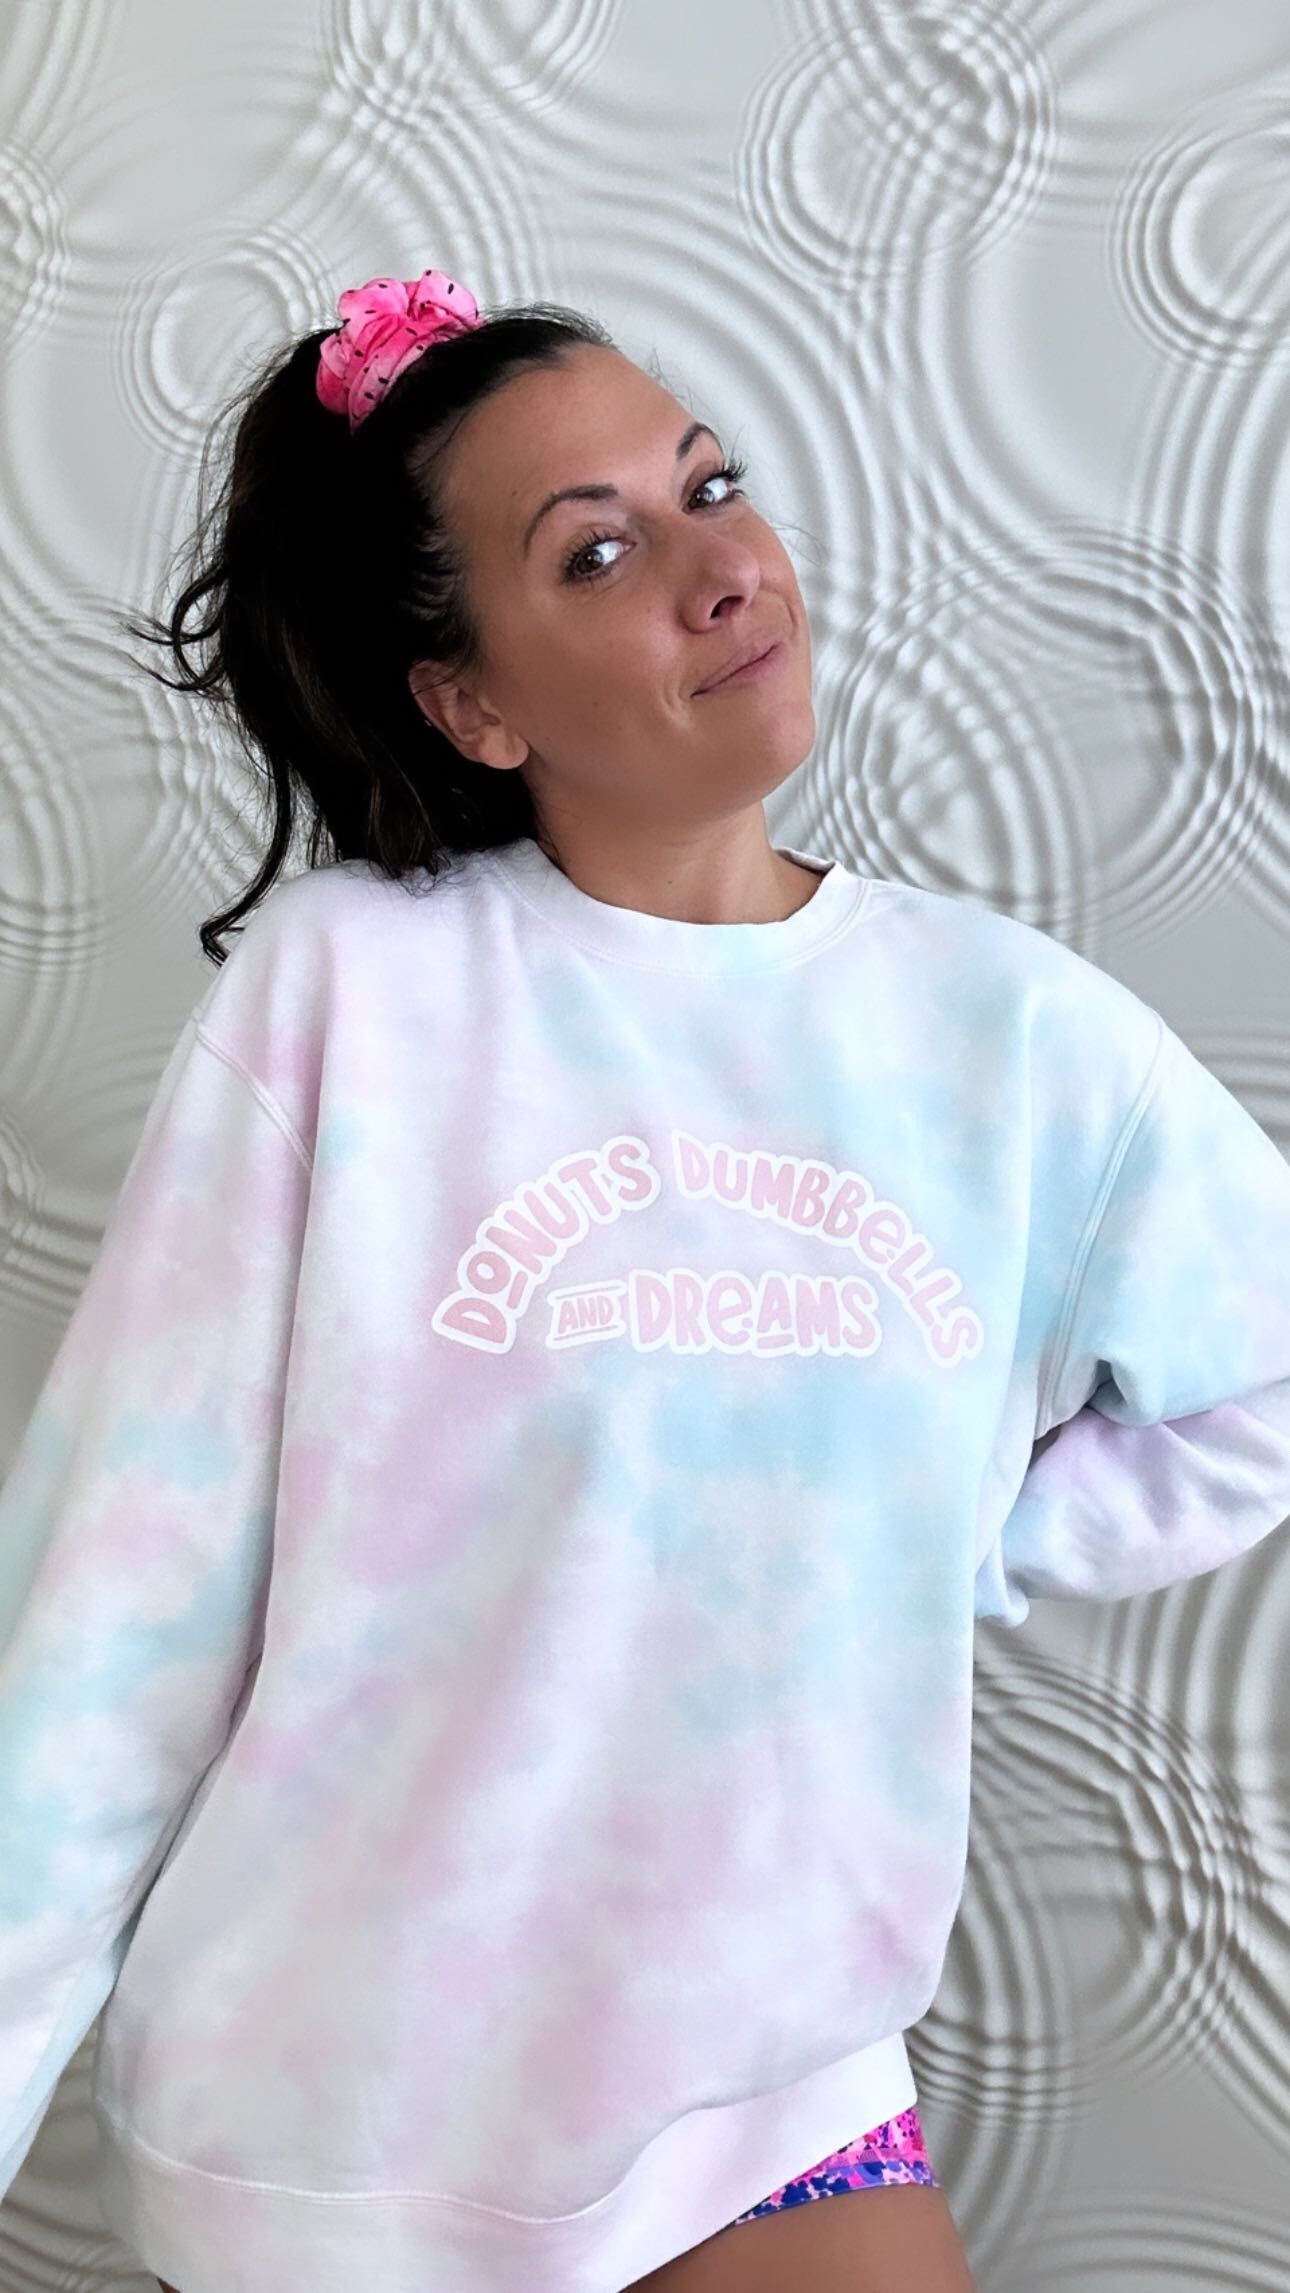 Donuts Dumbbells and Dreams - Sweater